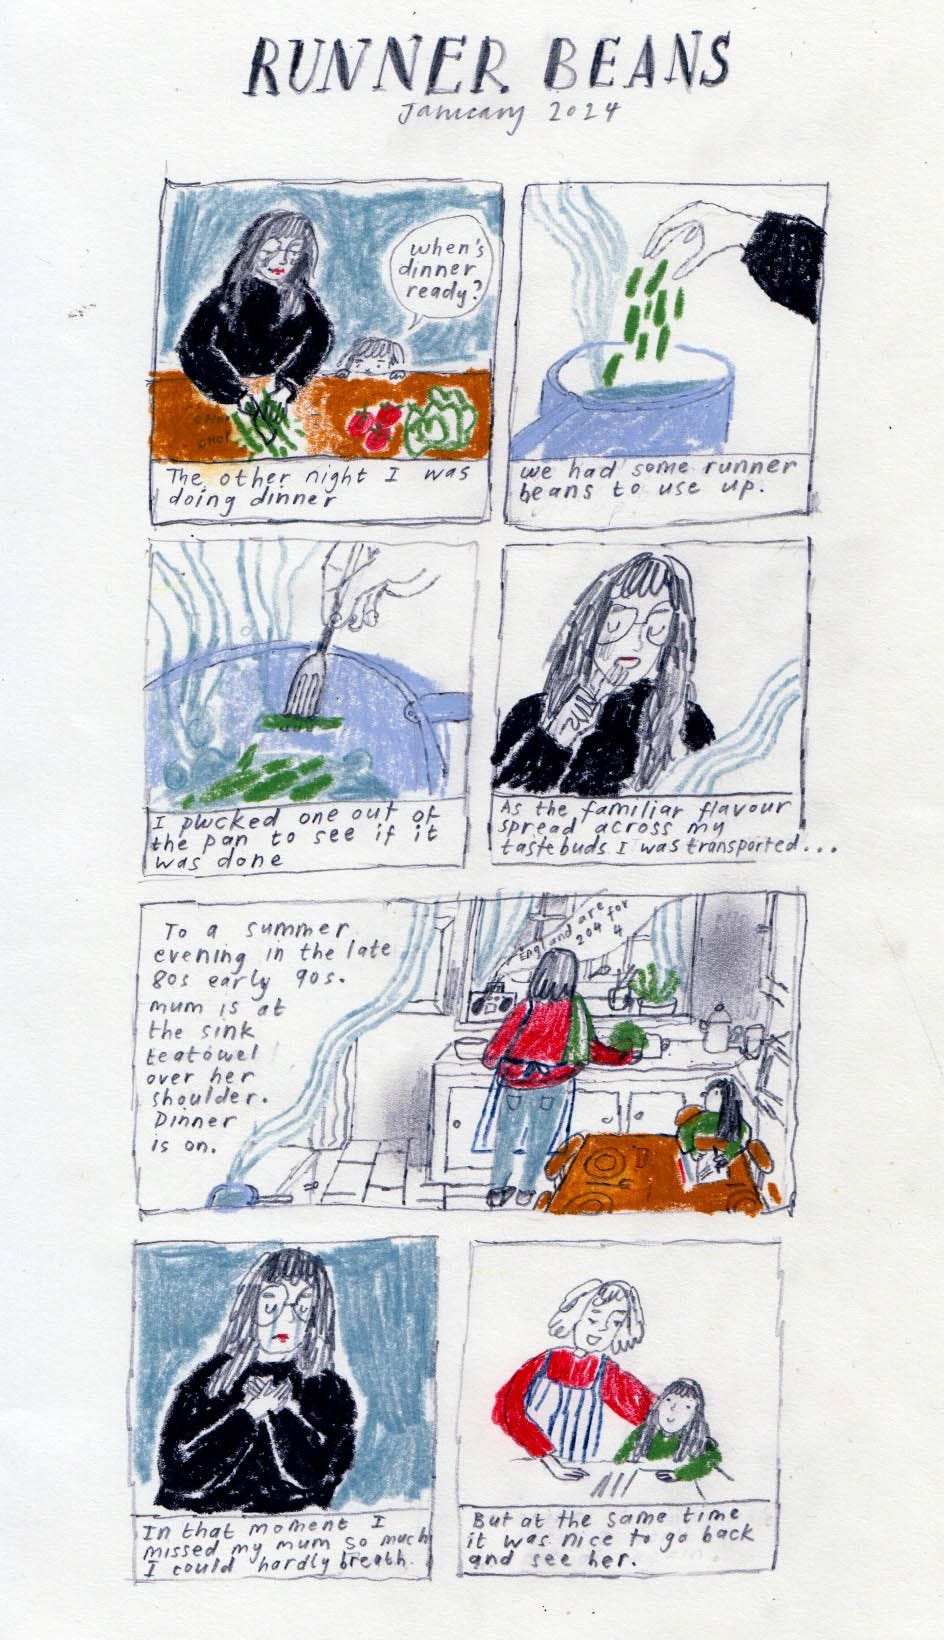 A comic about grief. A woman has a powerful memory triggered by the nostaligic flavour of runner beans 